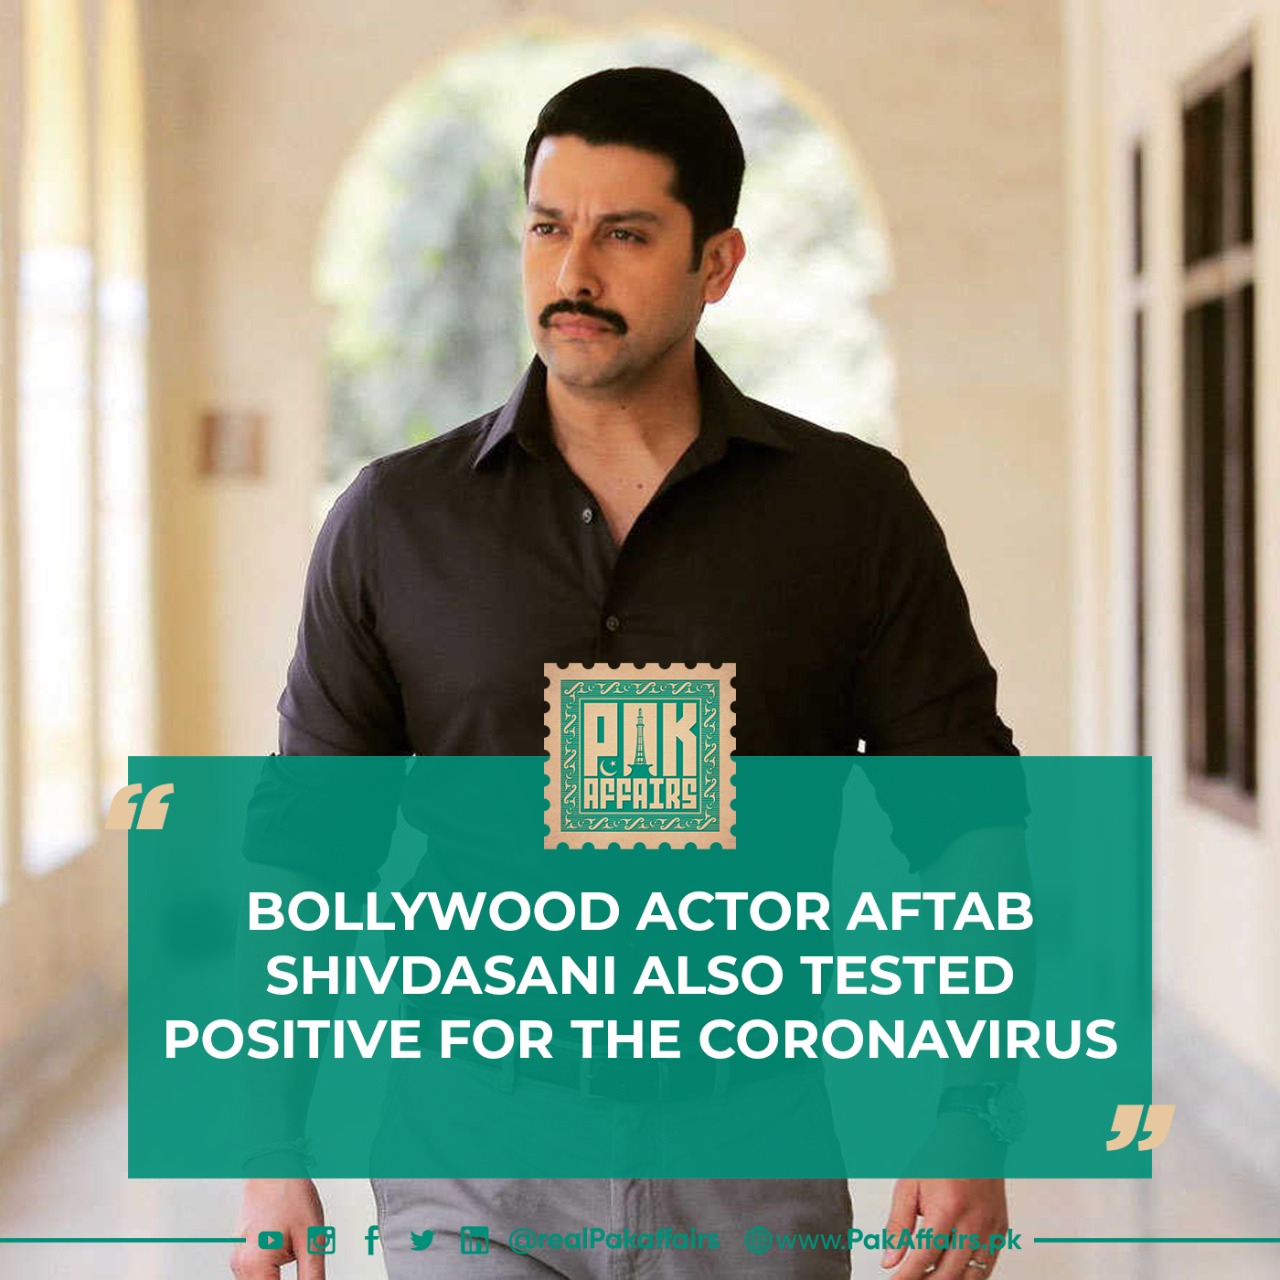 Bollywood actor Aftab Shivdasani also tested positive for the coronavirus.